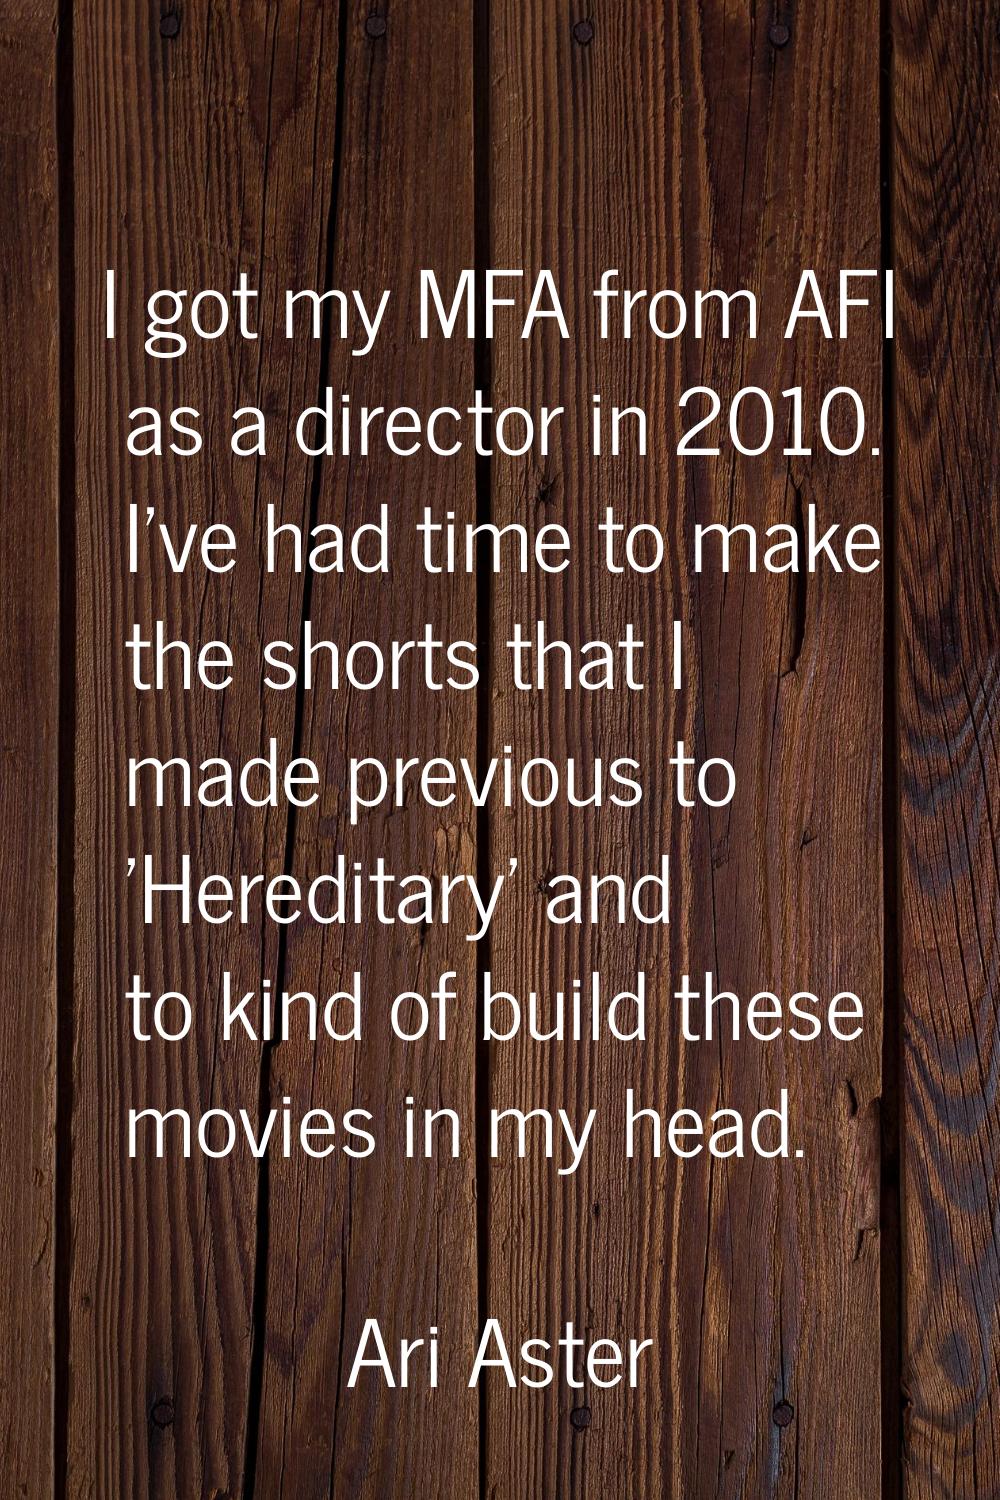 I got my MFA from AFI as a director in 2010. I've had time to make the shorts that I made previous 